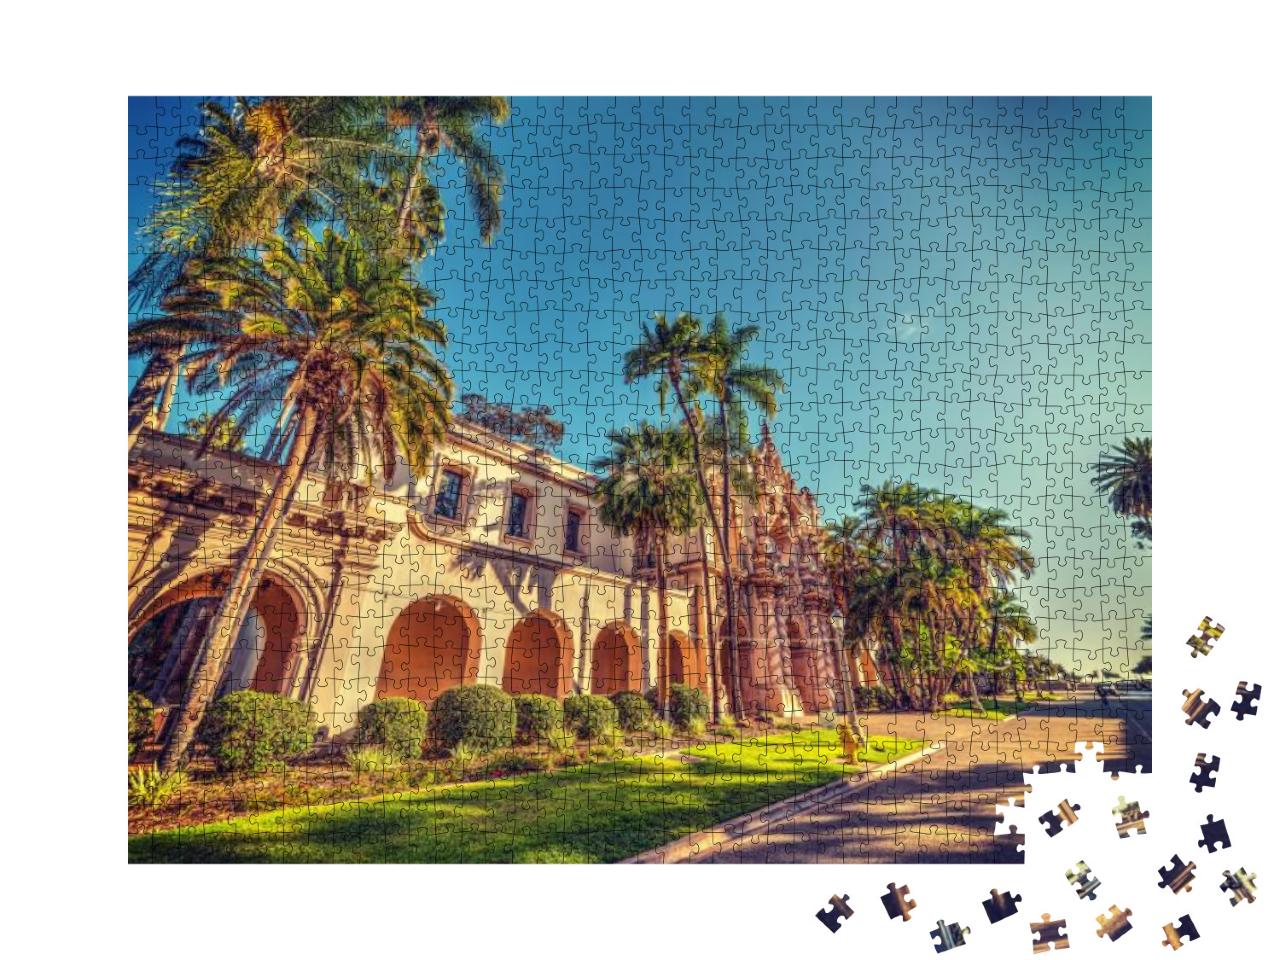 Arcade in Balboa Park on a Sunny Day, San Diego. Californ... Jigsaw Puzzle with 1000 pieces